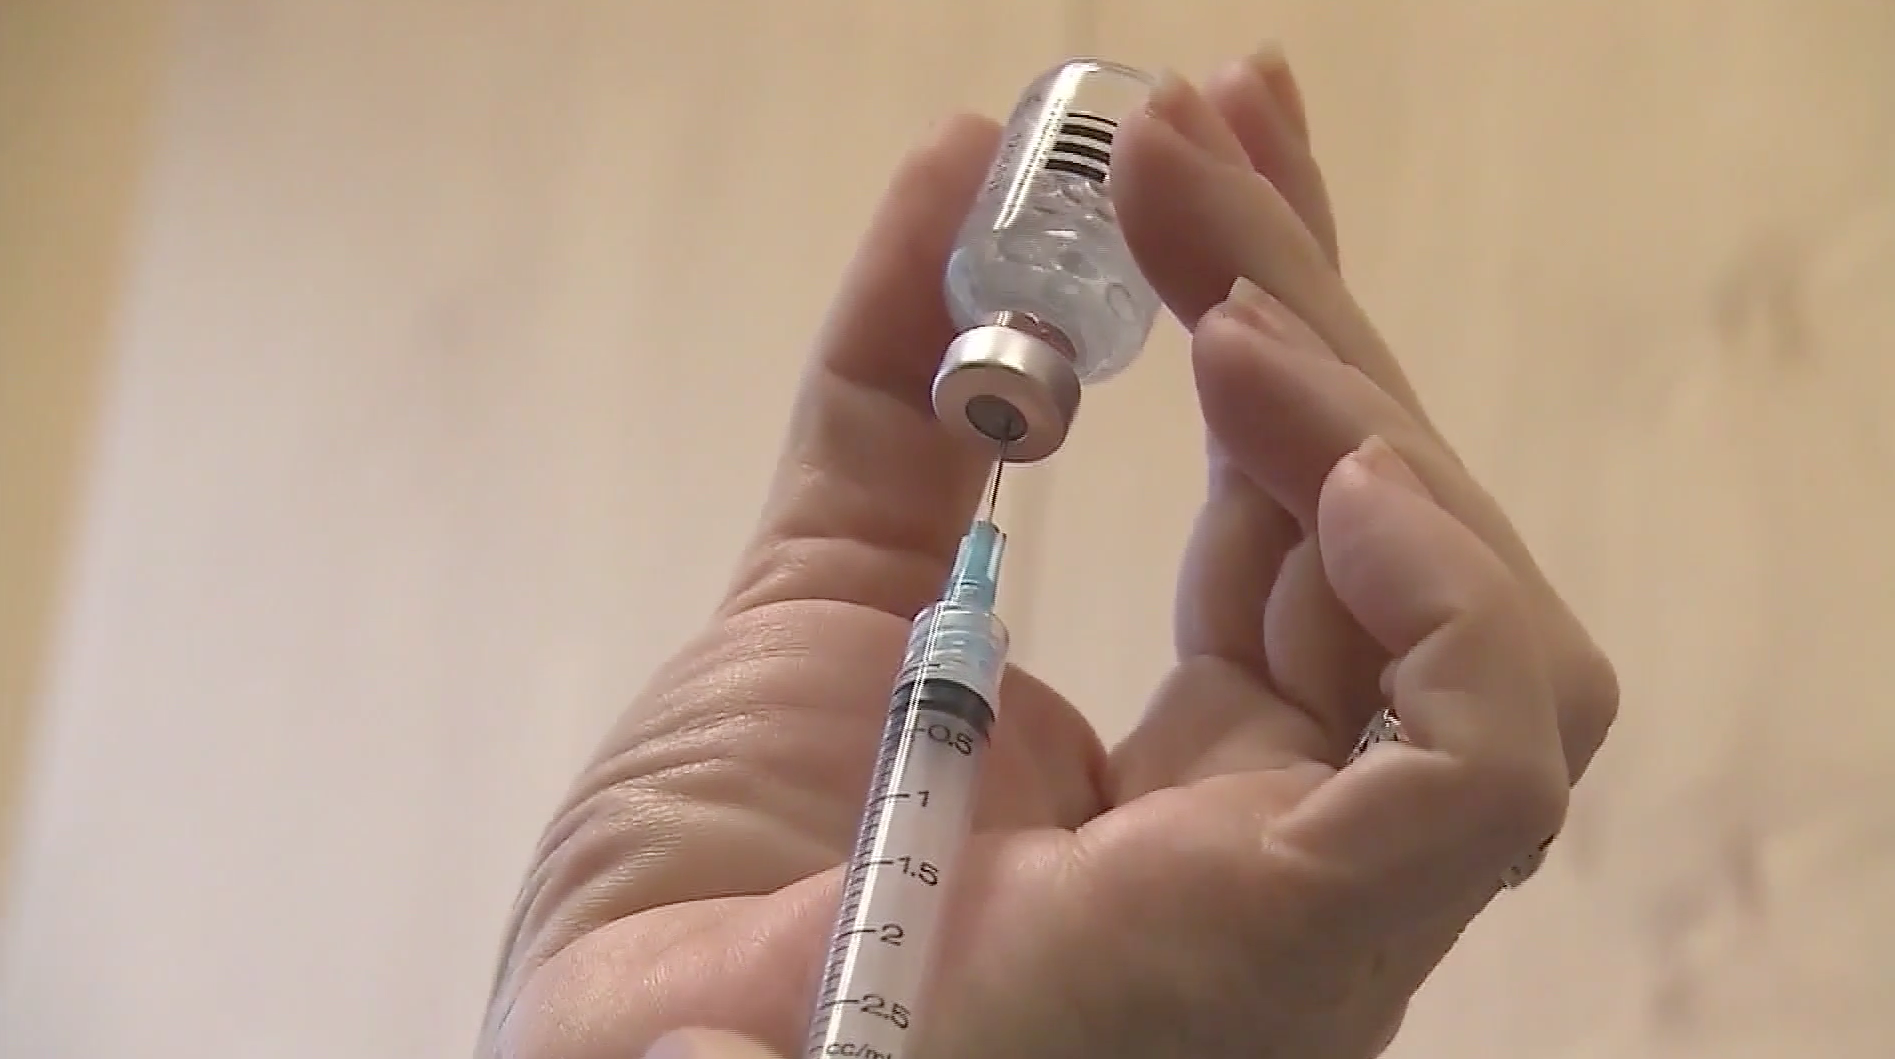 Pharmacist arrested in Wisconsin for deliberate spoilage of COVID vaccines – WCCO